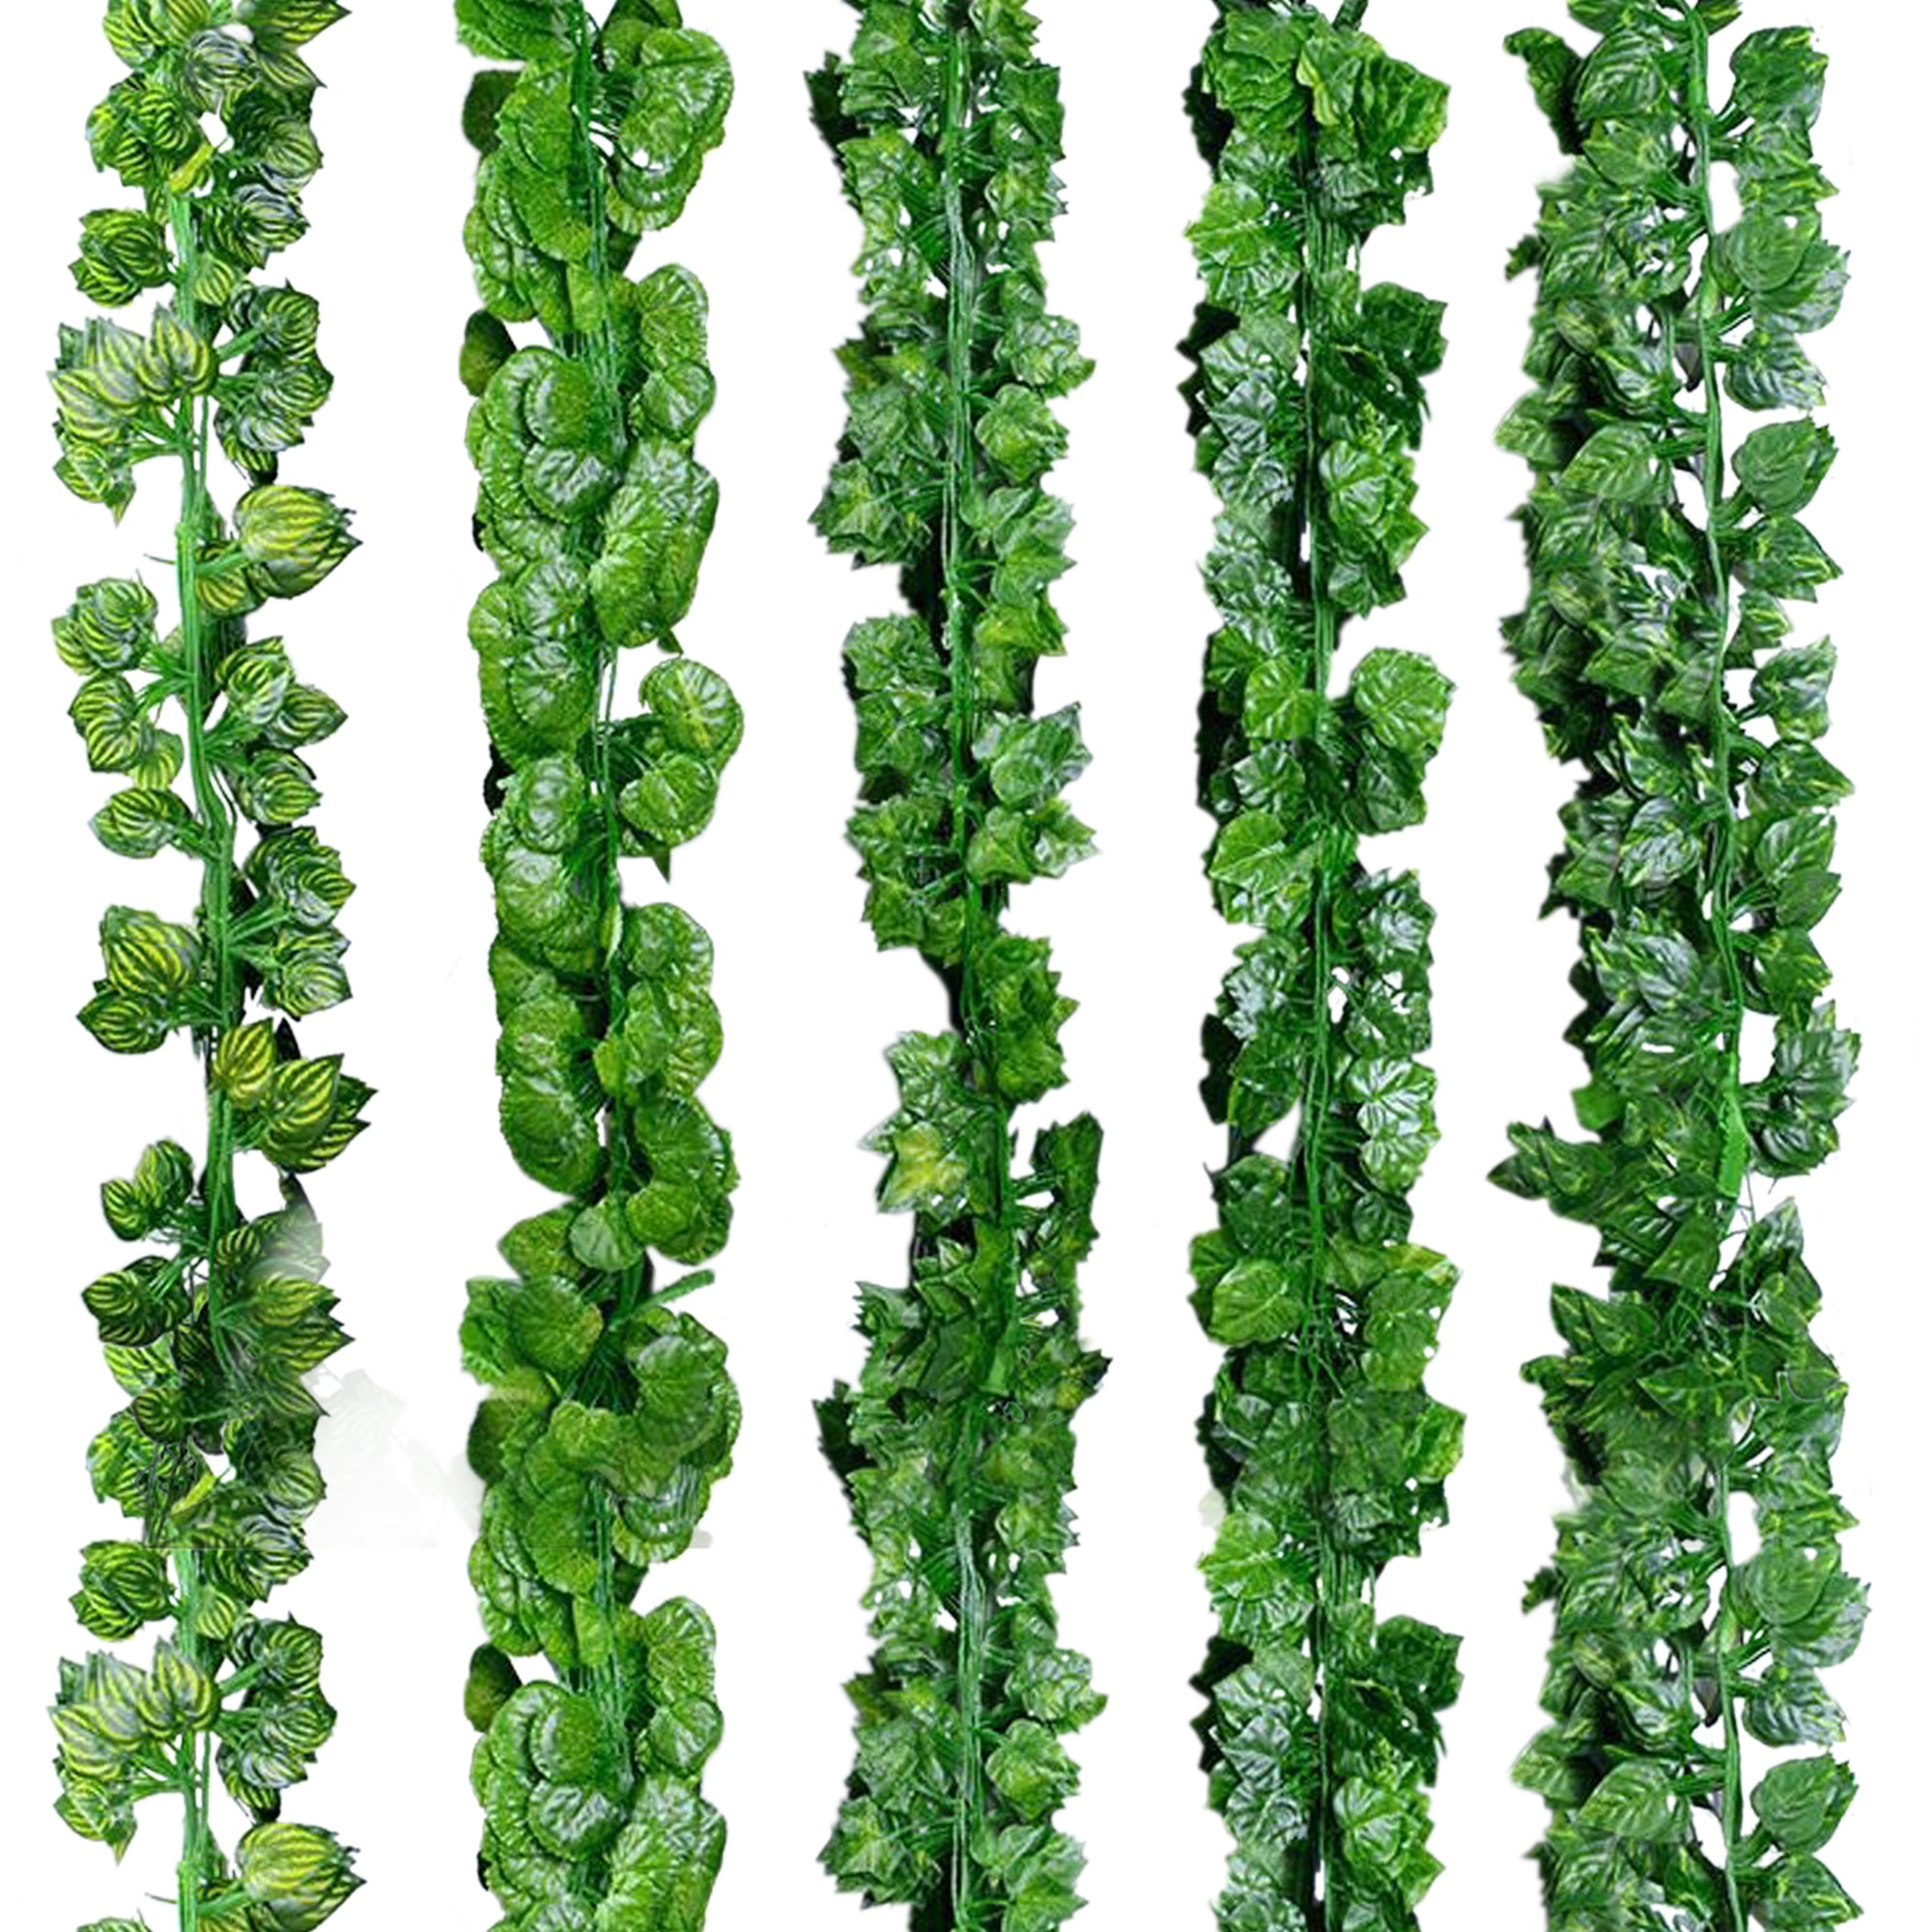 Artificial Ivy Garland Fake Hanging Plants Outdoor